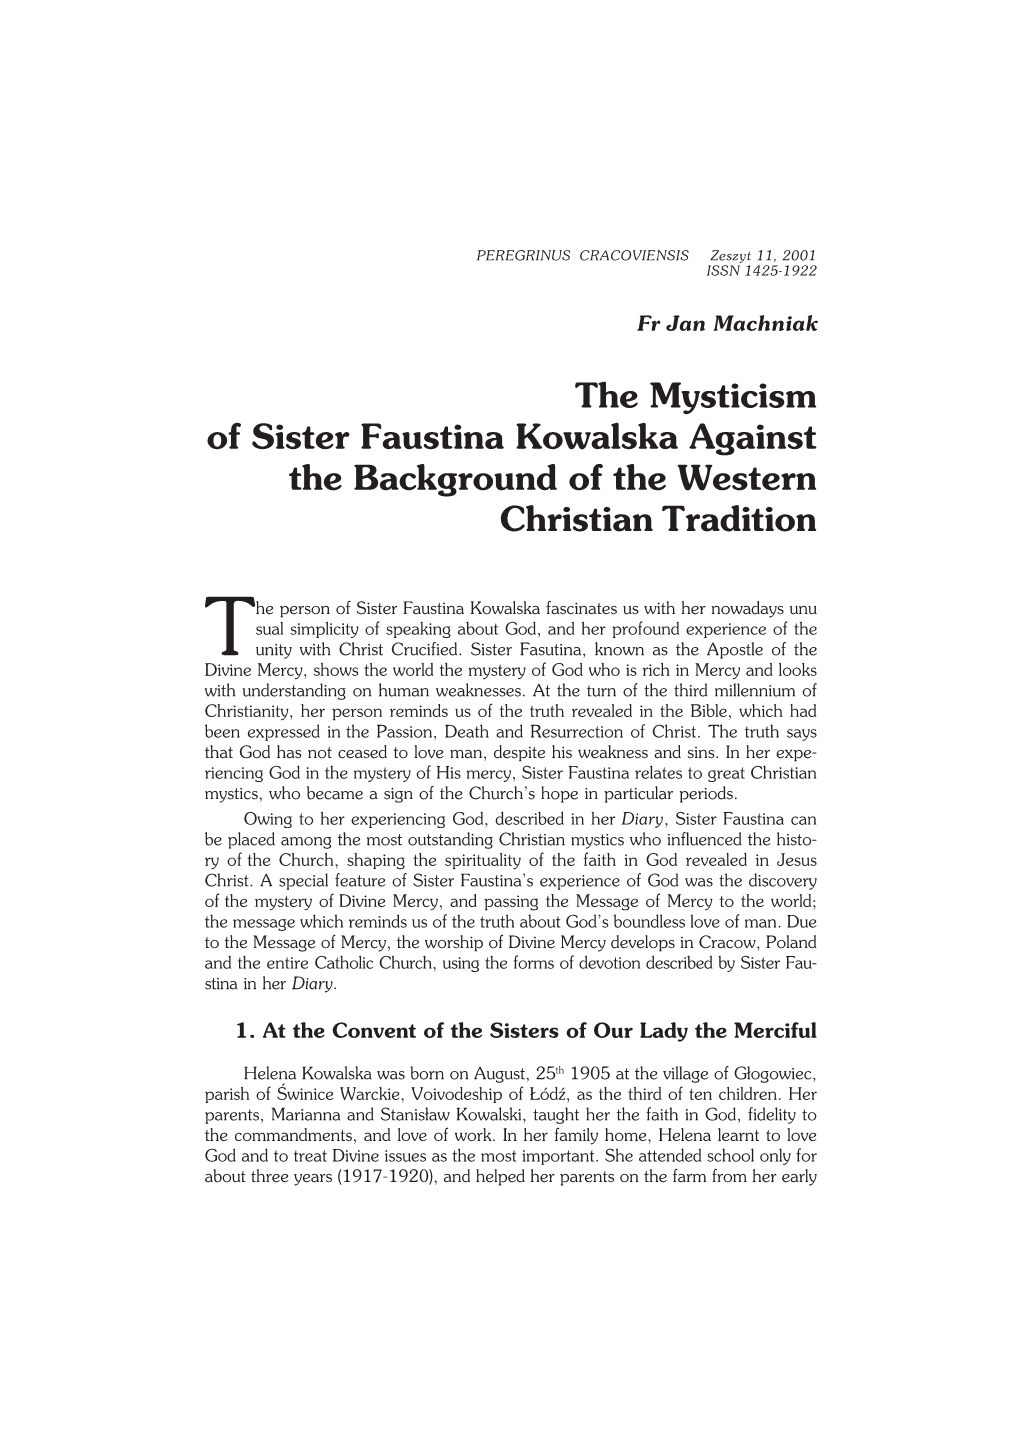 The Mysticism of Sister Faustina Kowalska Against the Background of the Western Christian Tradition